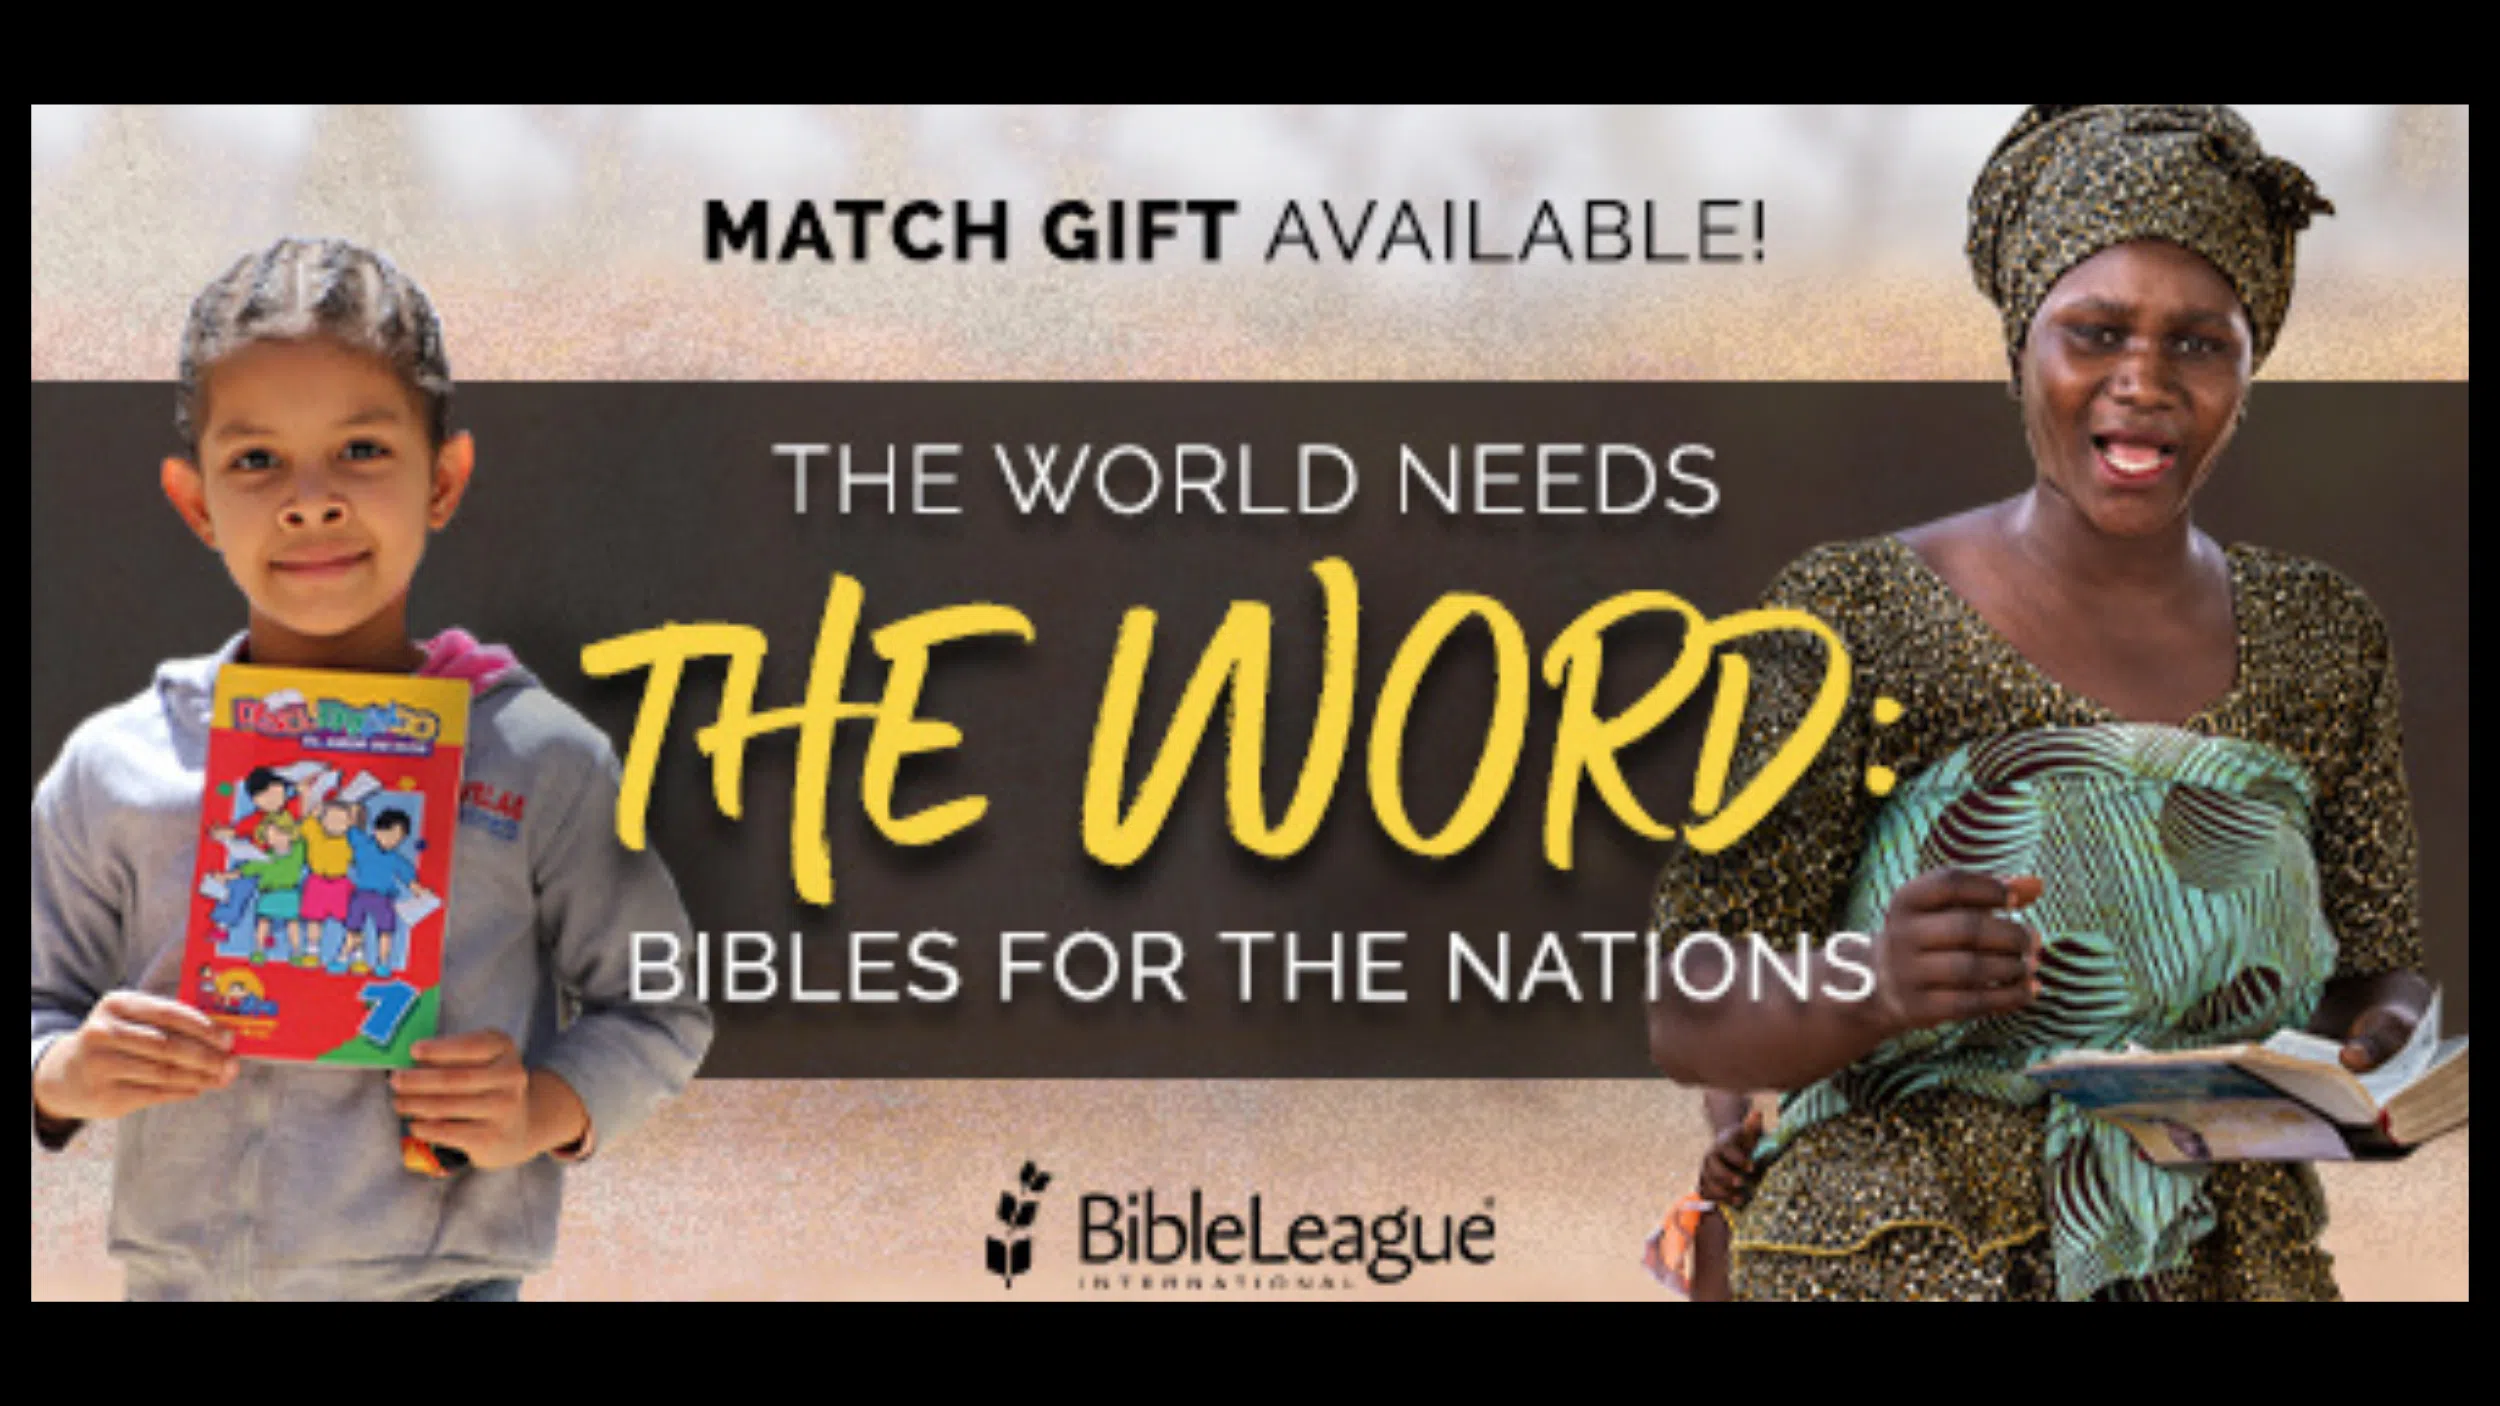 Feature: https://www.bibleleague.org/donation/the-world-needs-the-word-bibles-for-the-nations24-web/?media=WLAB